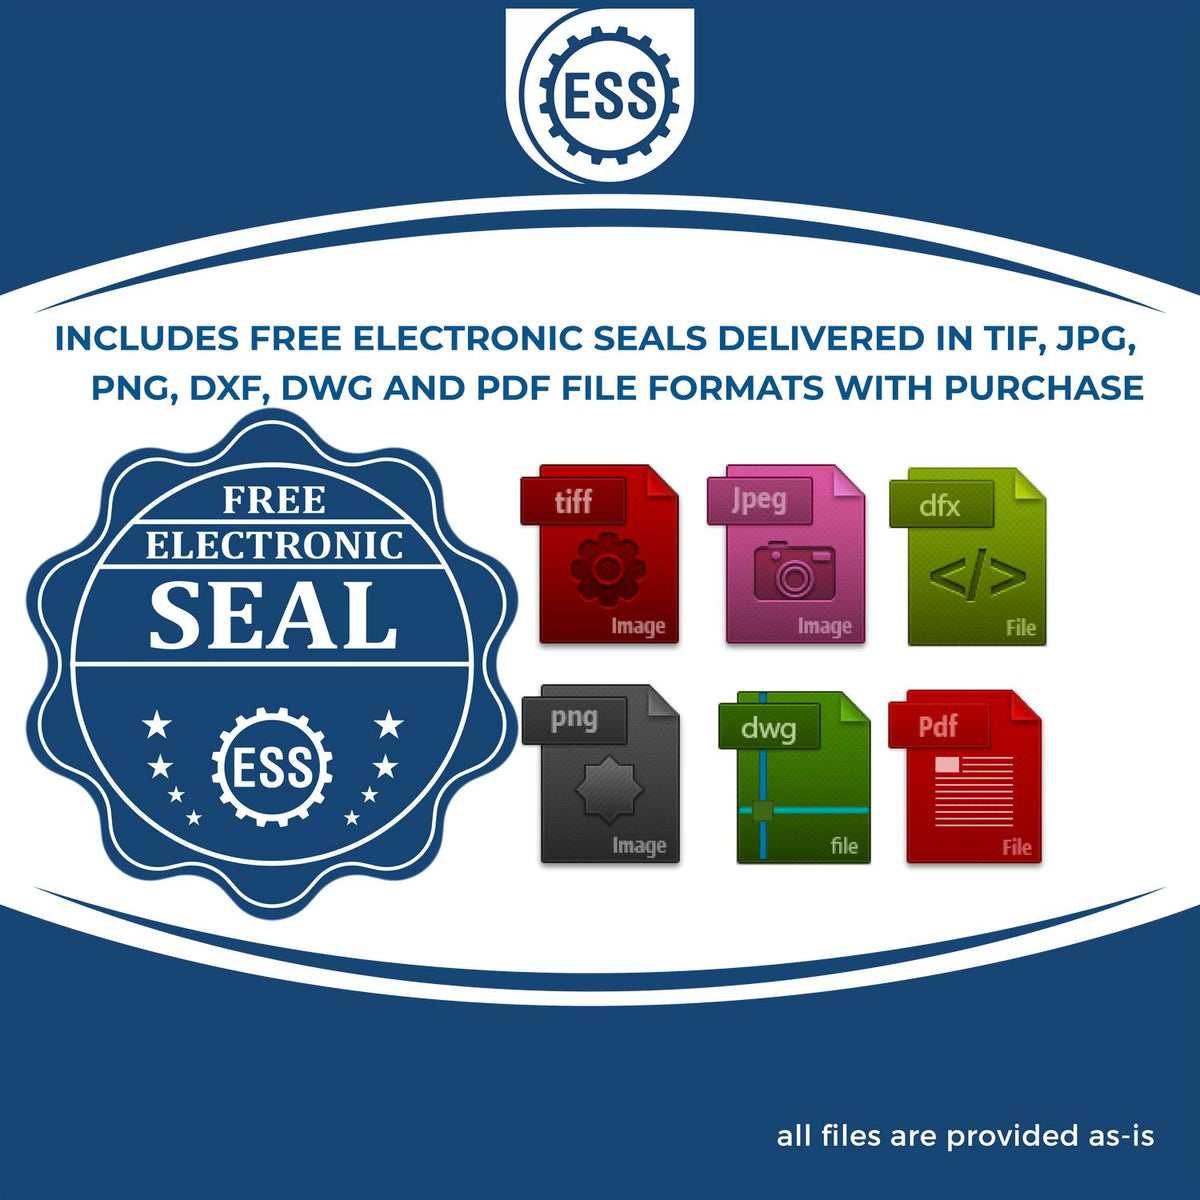 An infographic for the free electronic seal for the Premium MaxLight Pre-Inked Colorado Engineering Stamp illustrating the different file type icons such as DXF, DWG, TIF, JPG and PNG.